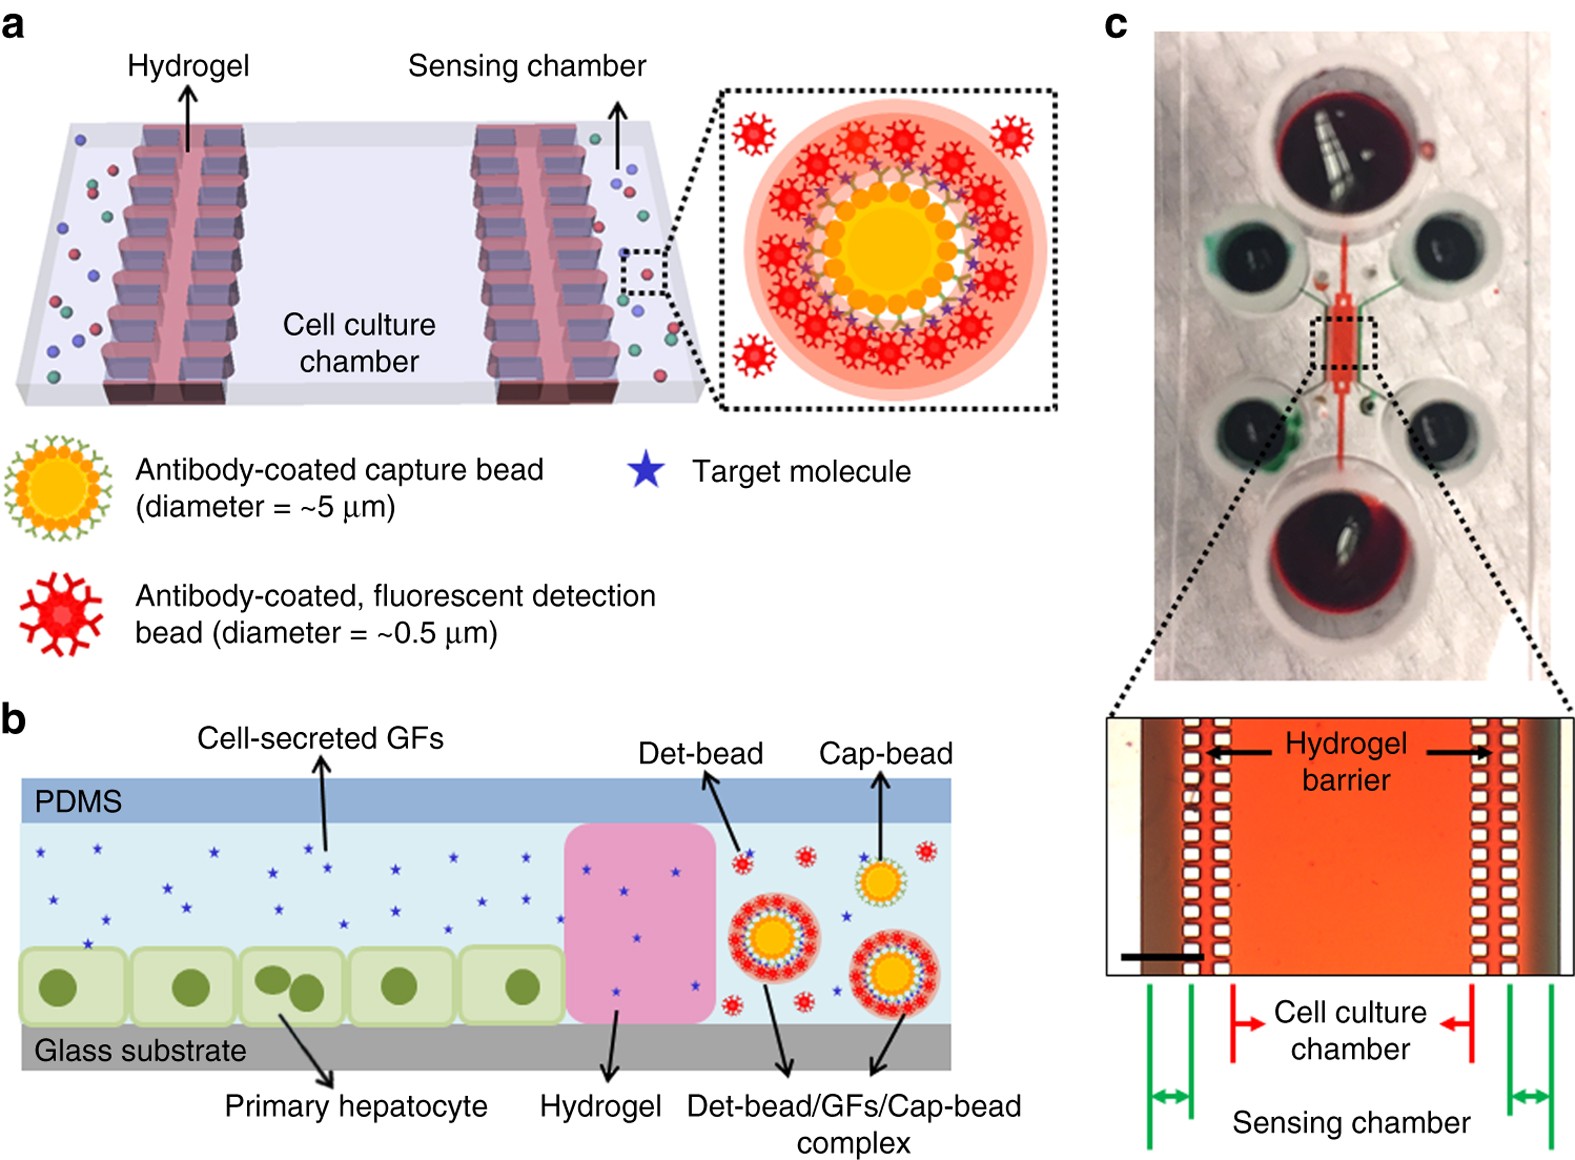 Detecting cell-secreted growth factors in microfluidic devices using  bead-based biosensors | Microsystems & Nanoengineering